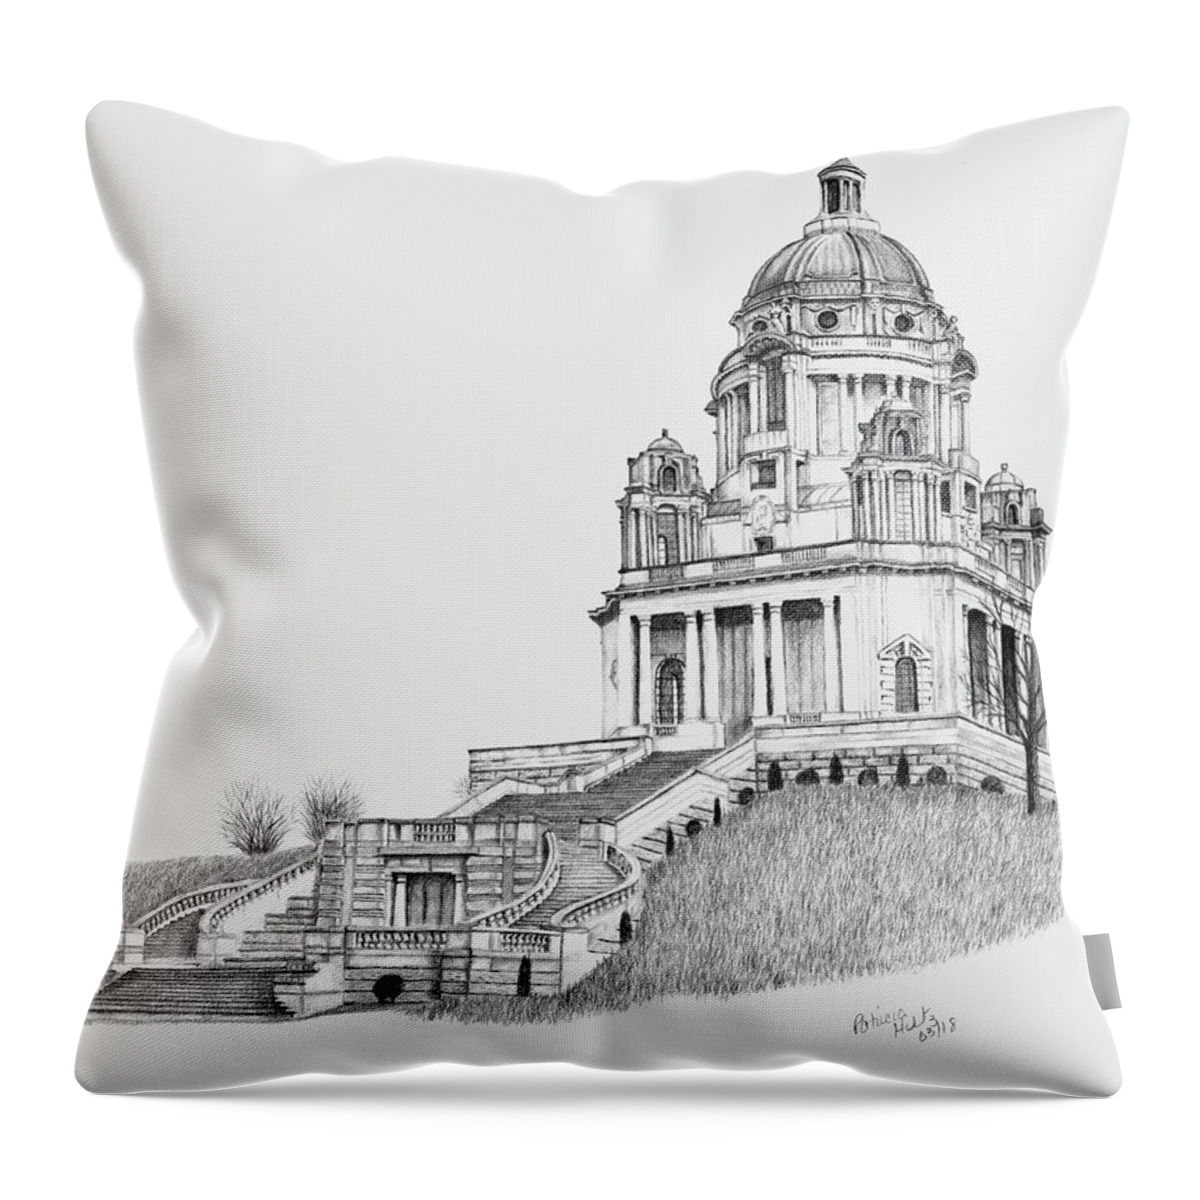 Building Throw Pillow featuring the drawing Ashton Memorial by Patricia Hiltz